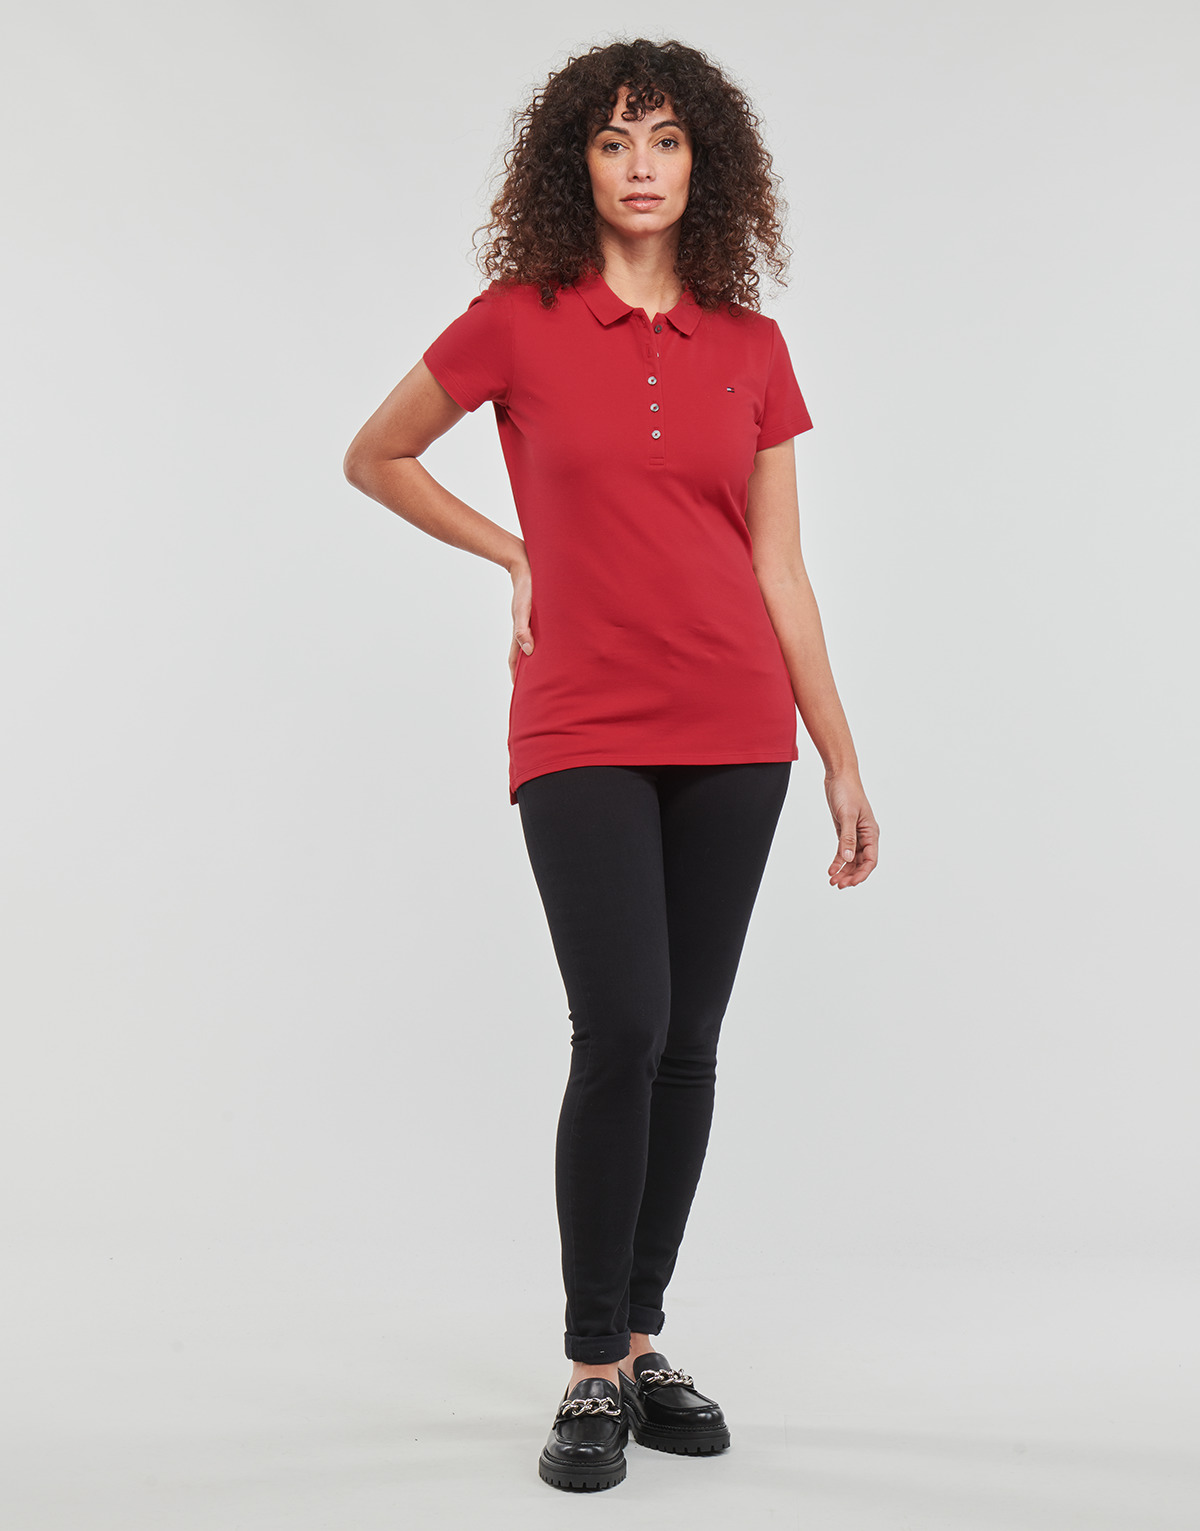 Tommy Hilfiger Rouge NEW CHIARA lTzZSe12